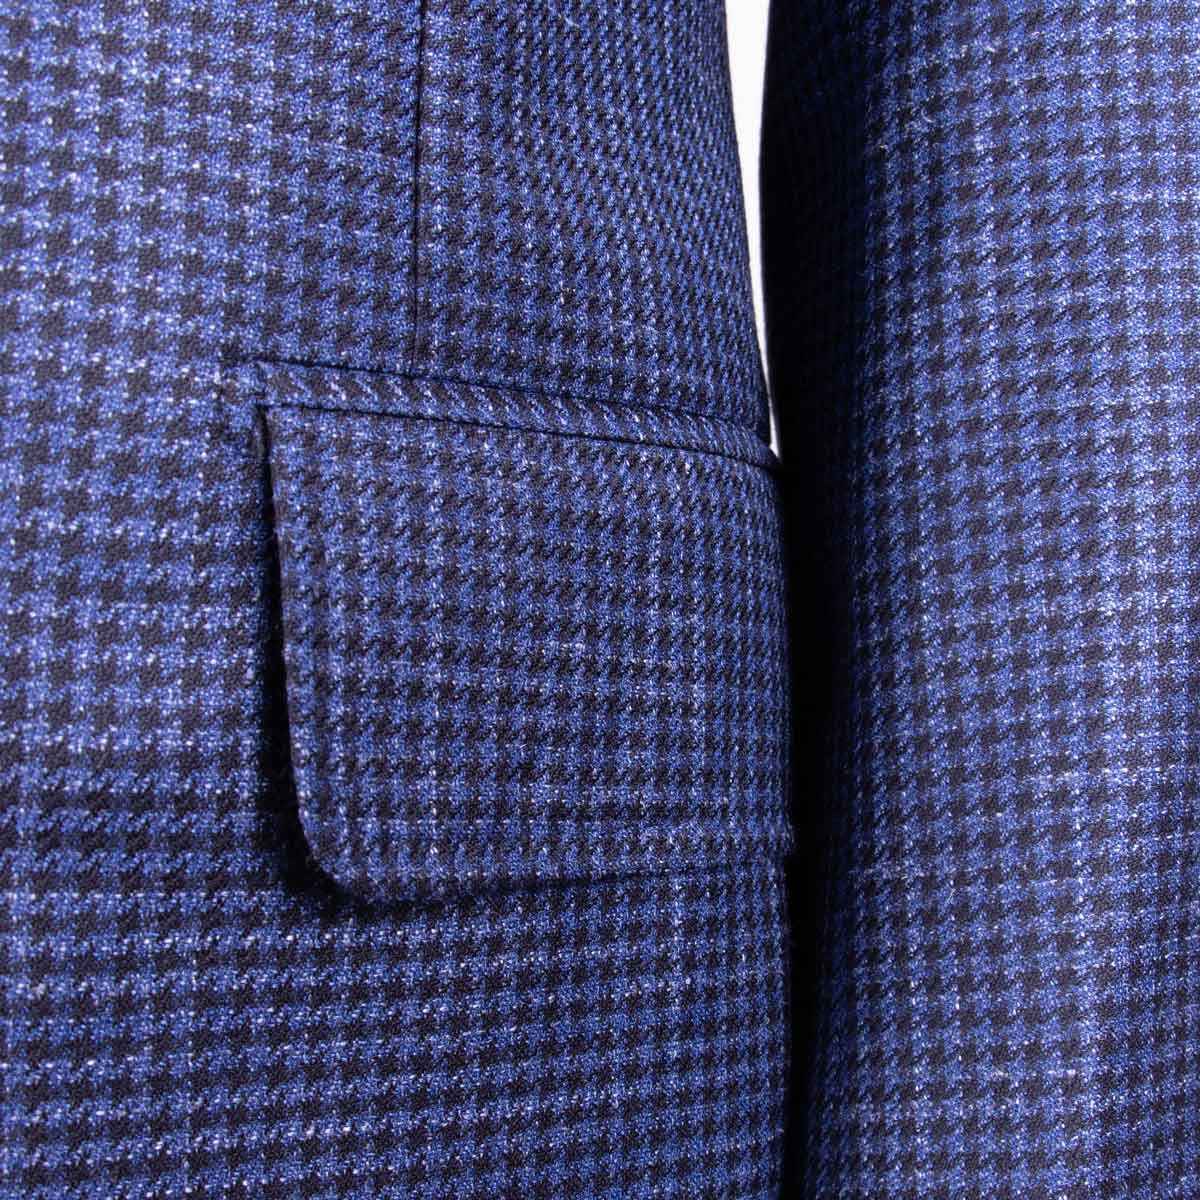 Navy Houndstooth Wool, Silk and Linen Jacket JACKETS Robert Old   